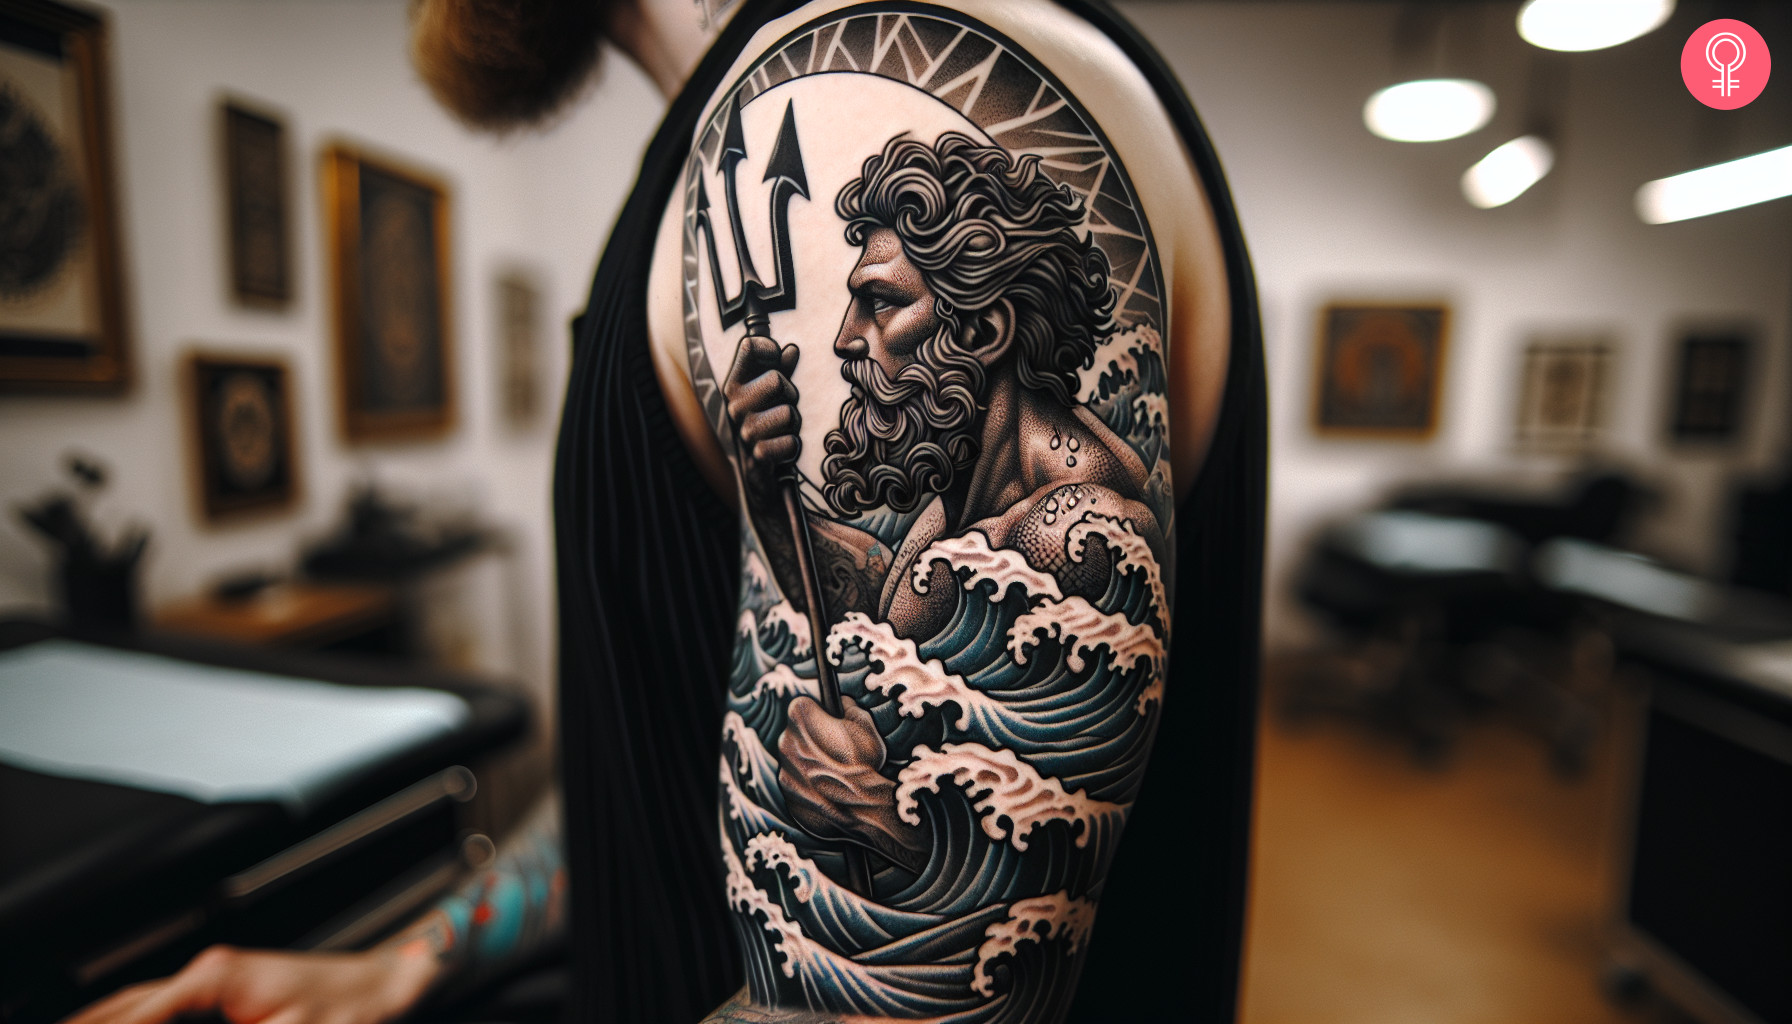 An artistic tattoo illustration of Poseidon emerging from the sea